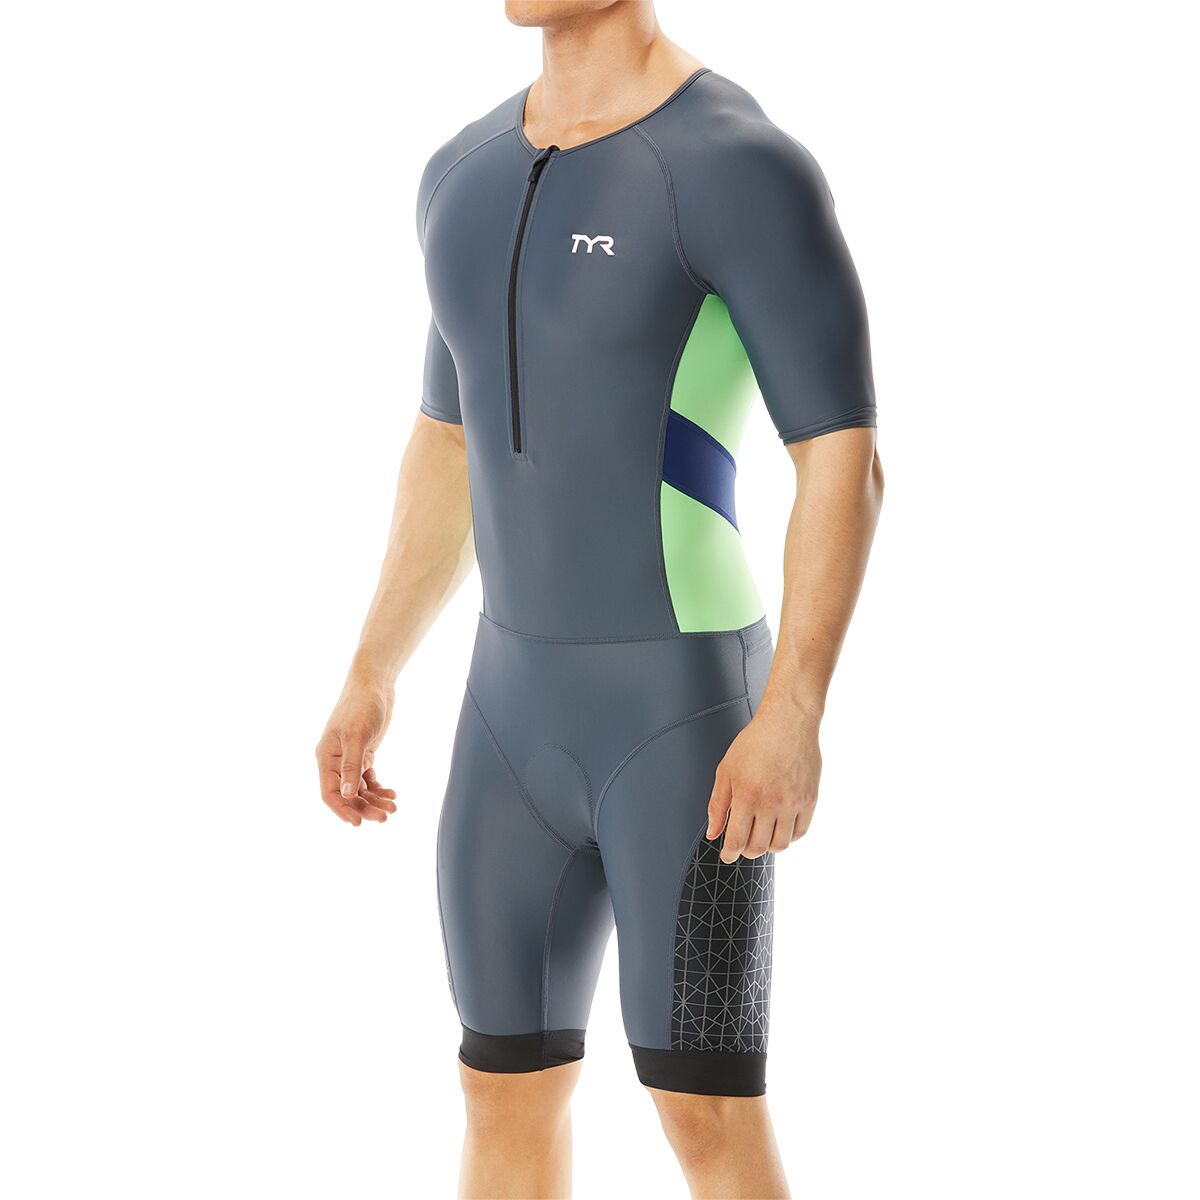 TYR Competitor Speedsuit - Men's | Competitive Cyclist